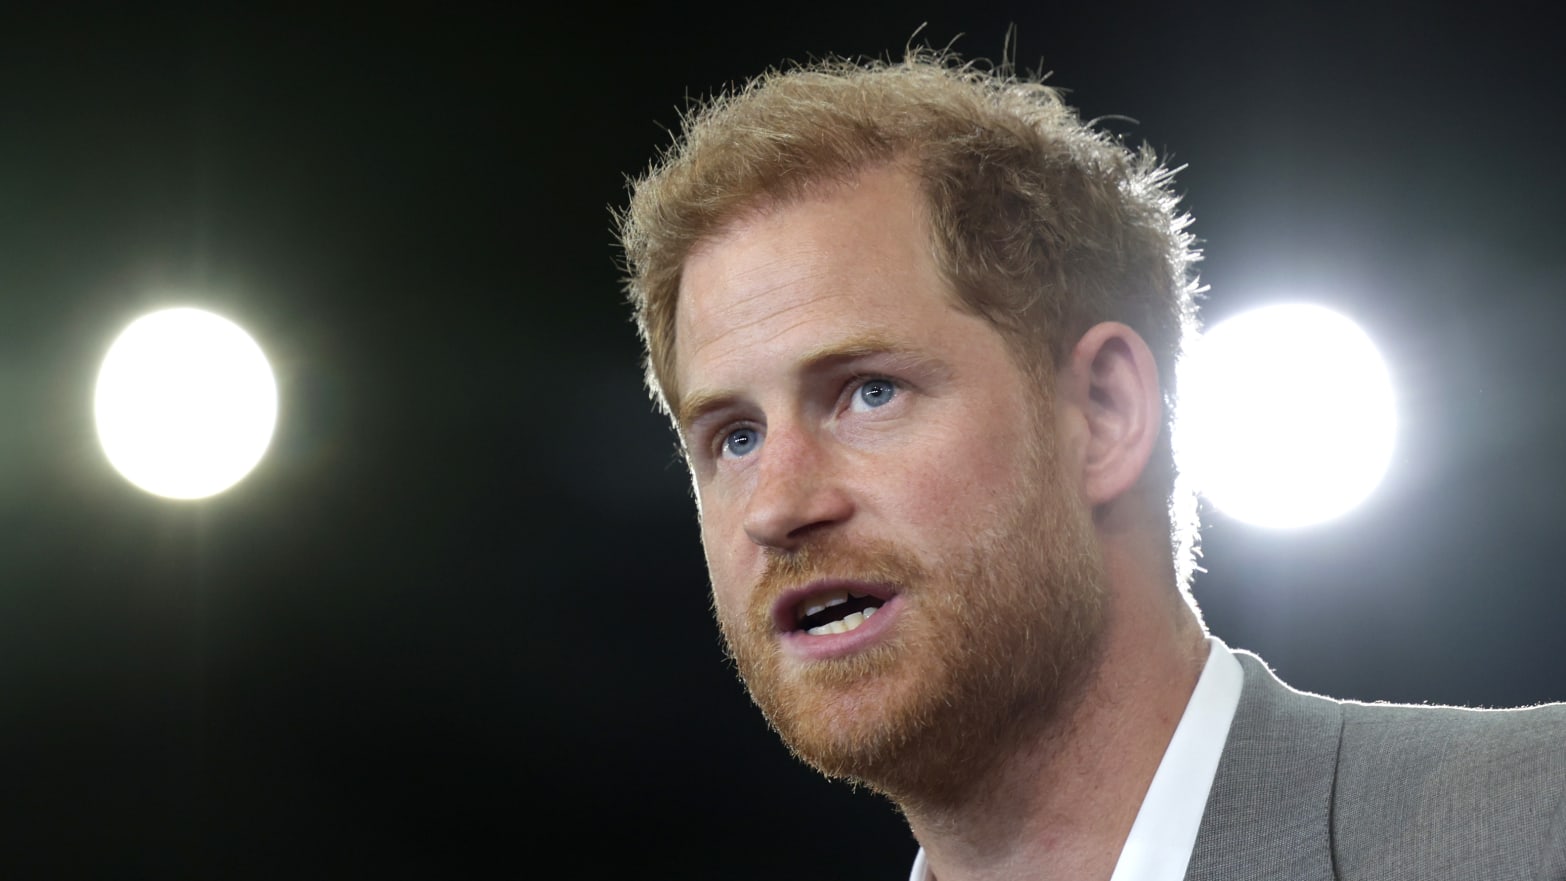 Prince Harry, Duke of Sussex, can’t resist trashing his family in his new Netflix documentary series “Heart of Invictus.”